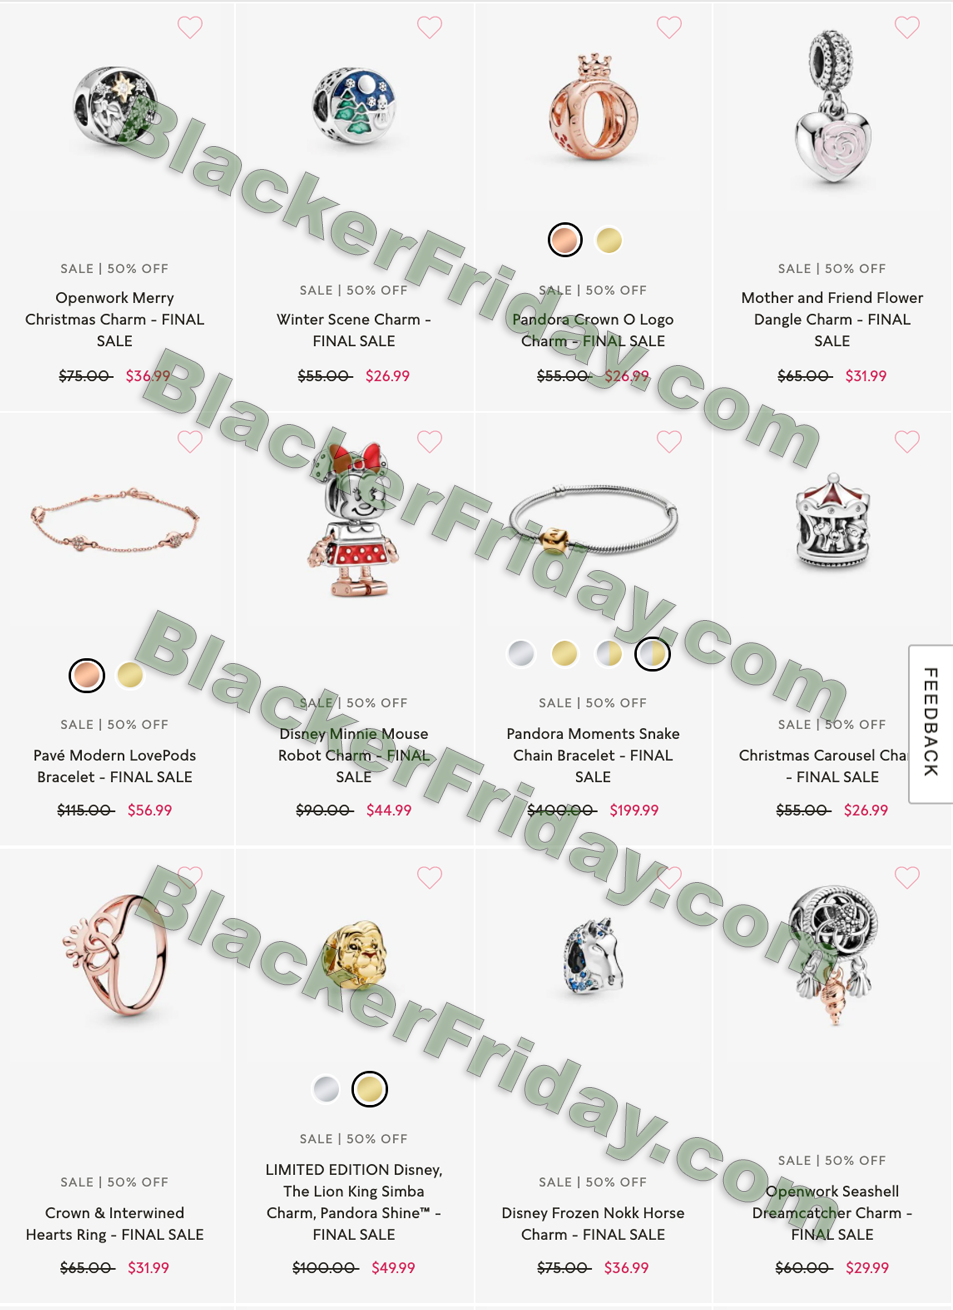 Pandora After Christmas Sale 2021 - What to Expect - Blacker Friday